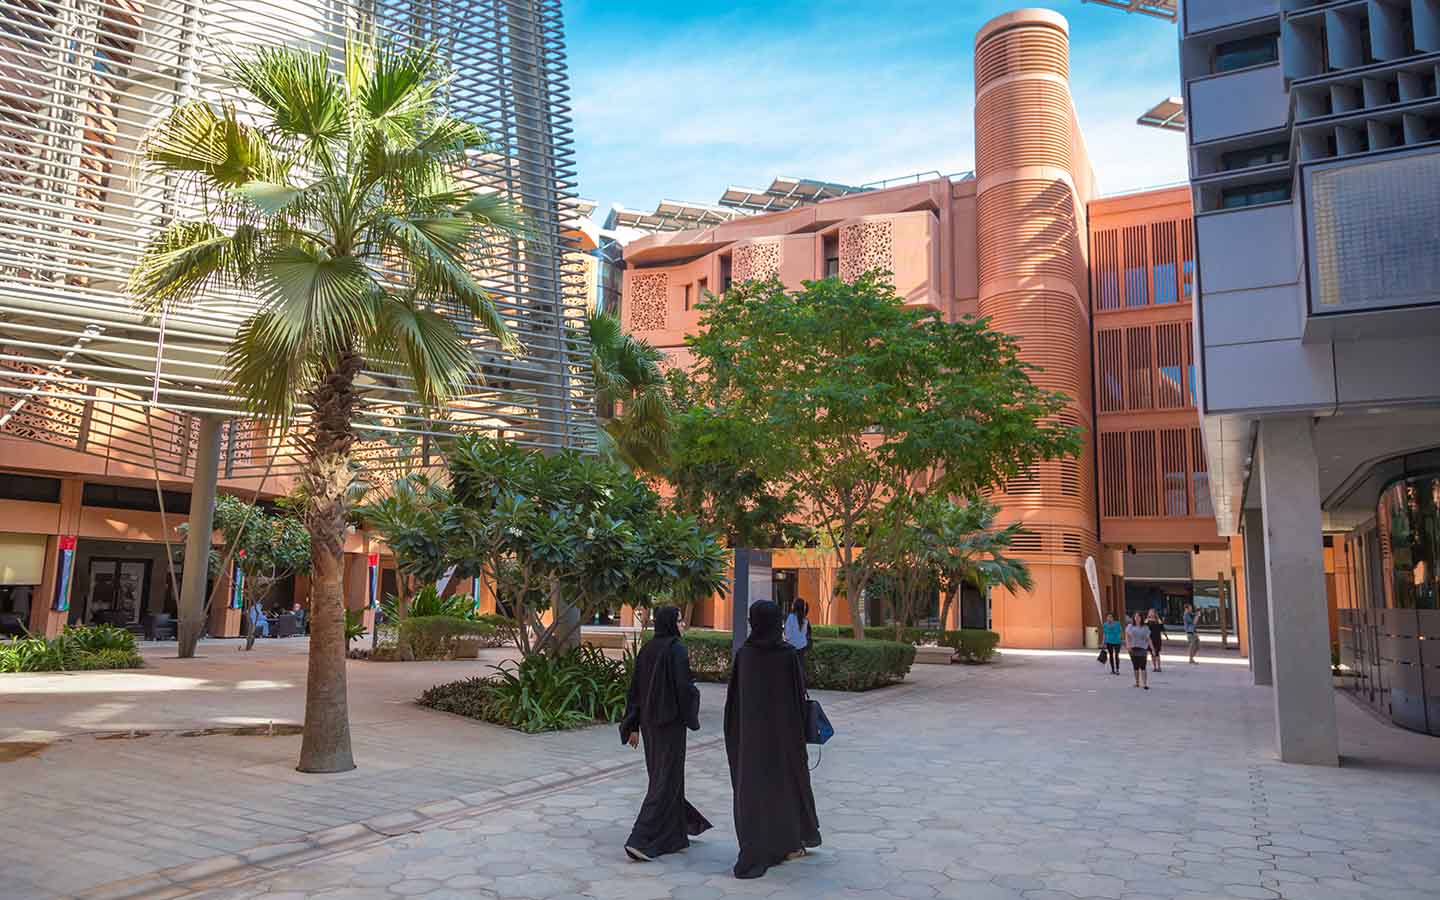 masdar city is also among the top areas to buy studio apartments in abu dhabi